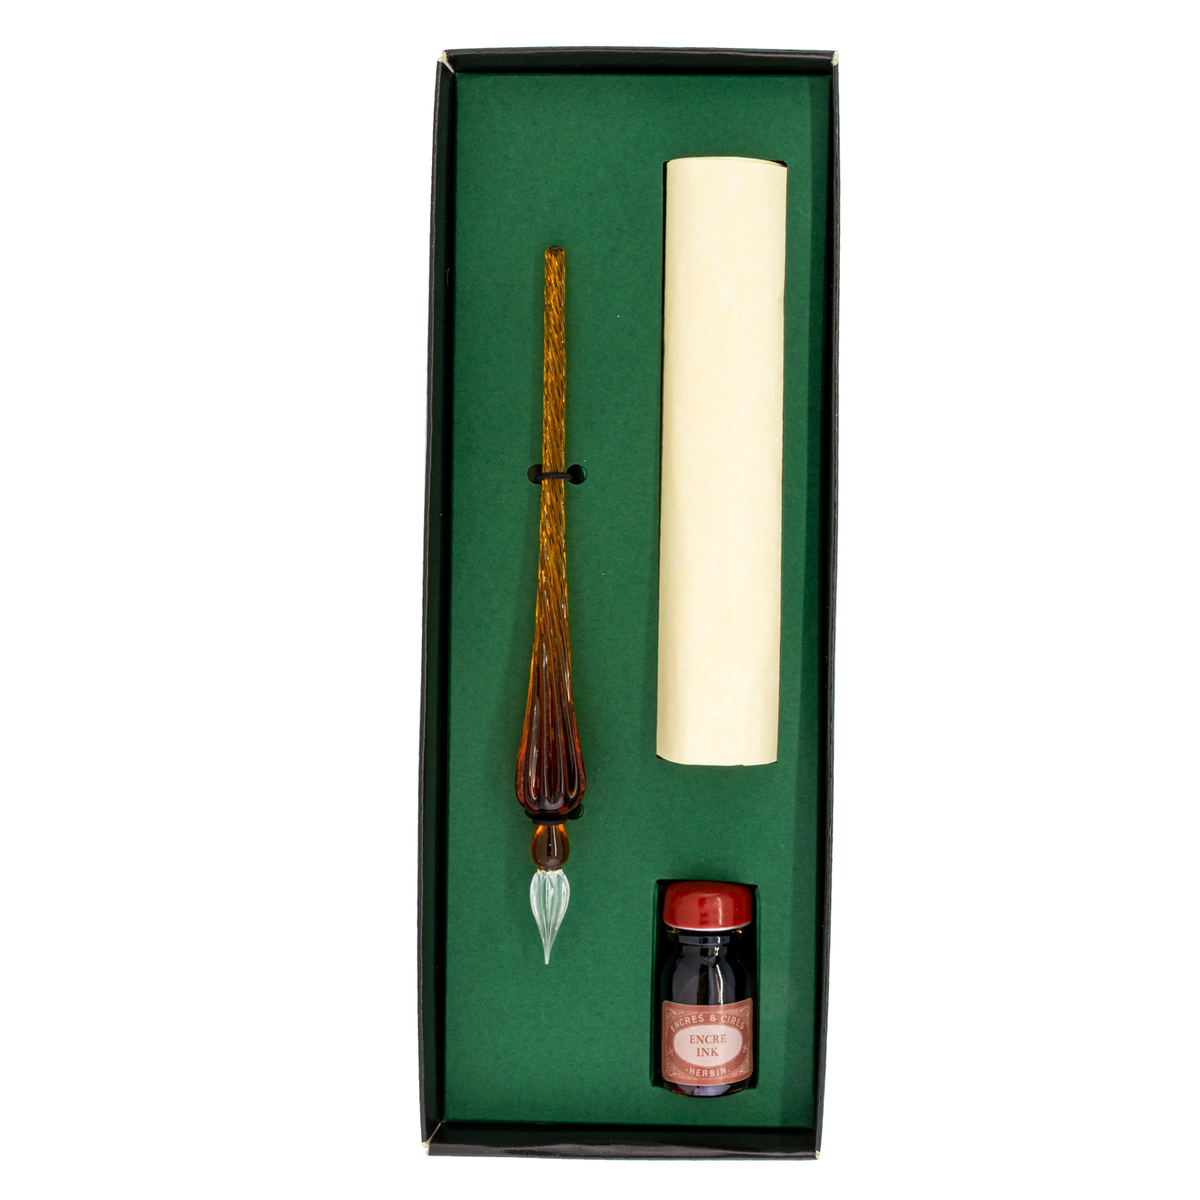 Herbin Calligraphy Supplies, Fine Writing Ink, Calligraphy Pens, and  Sealing Wax